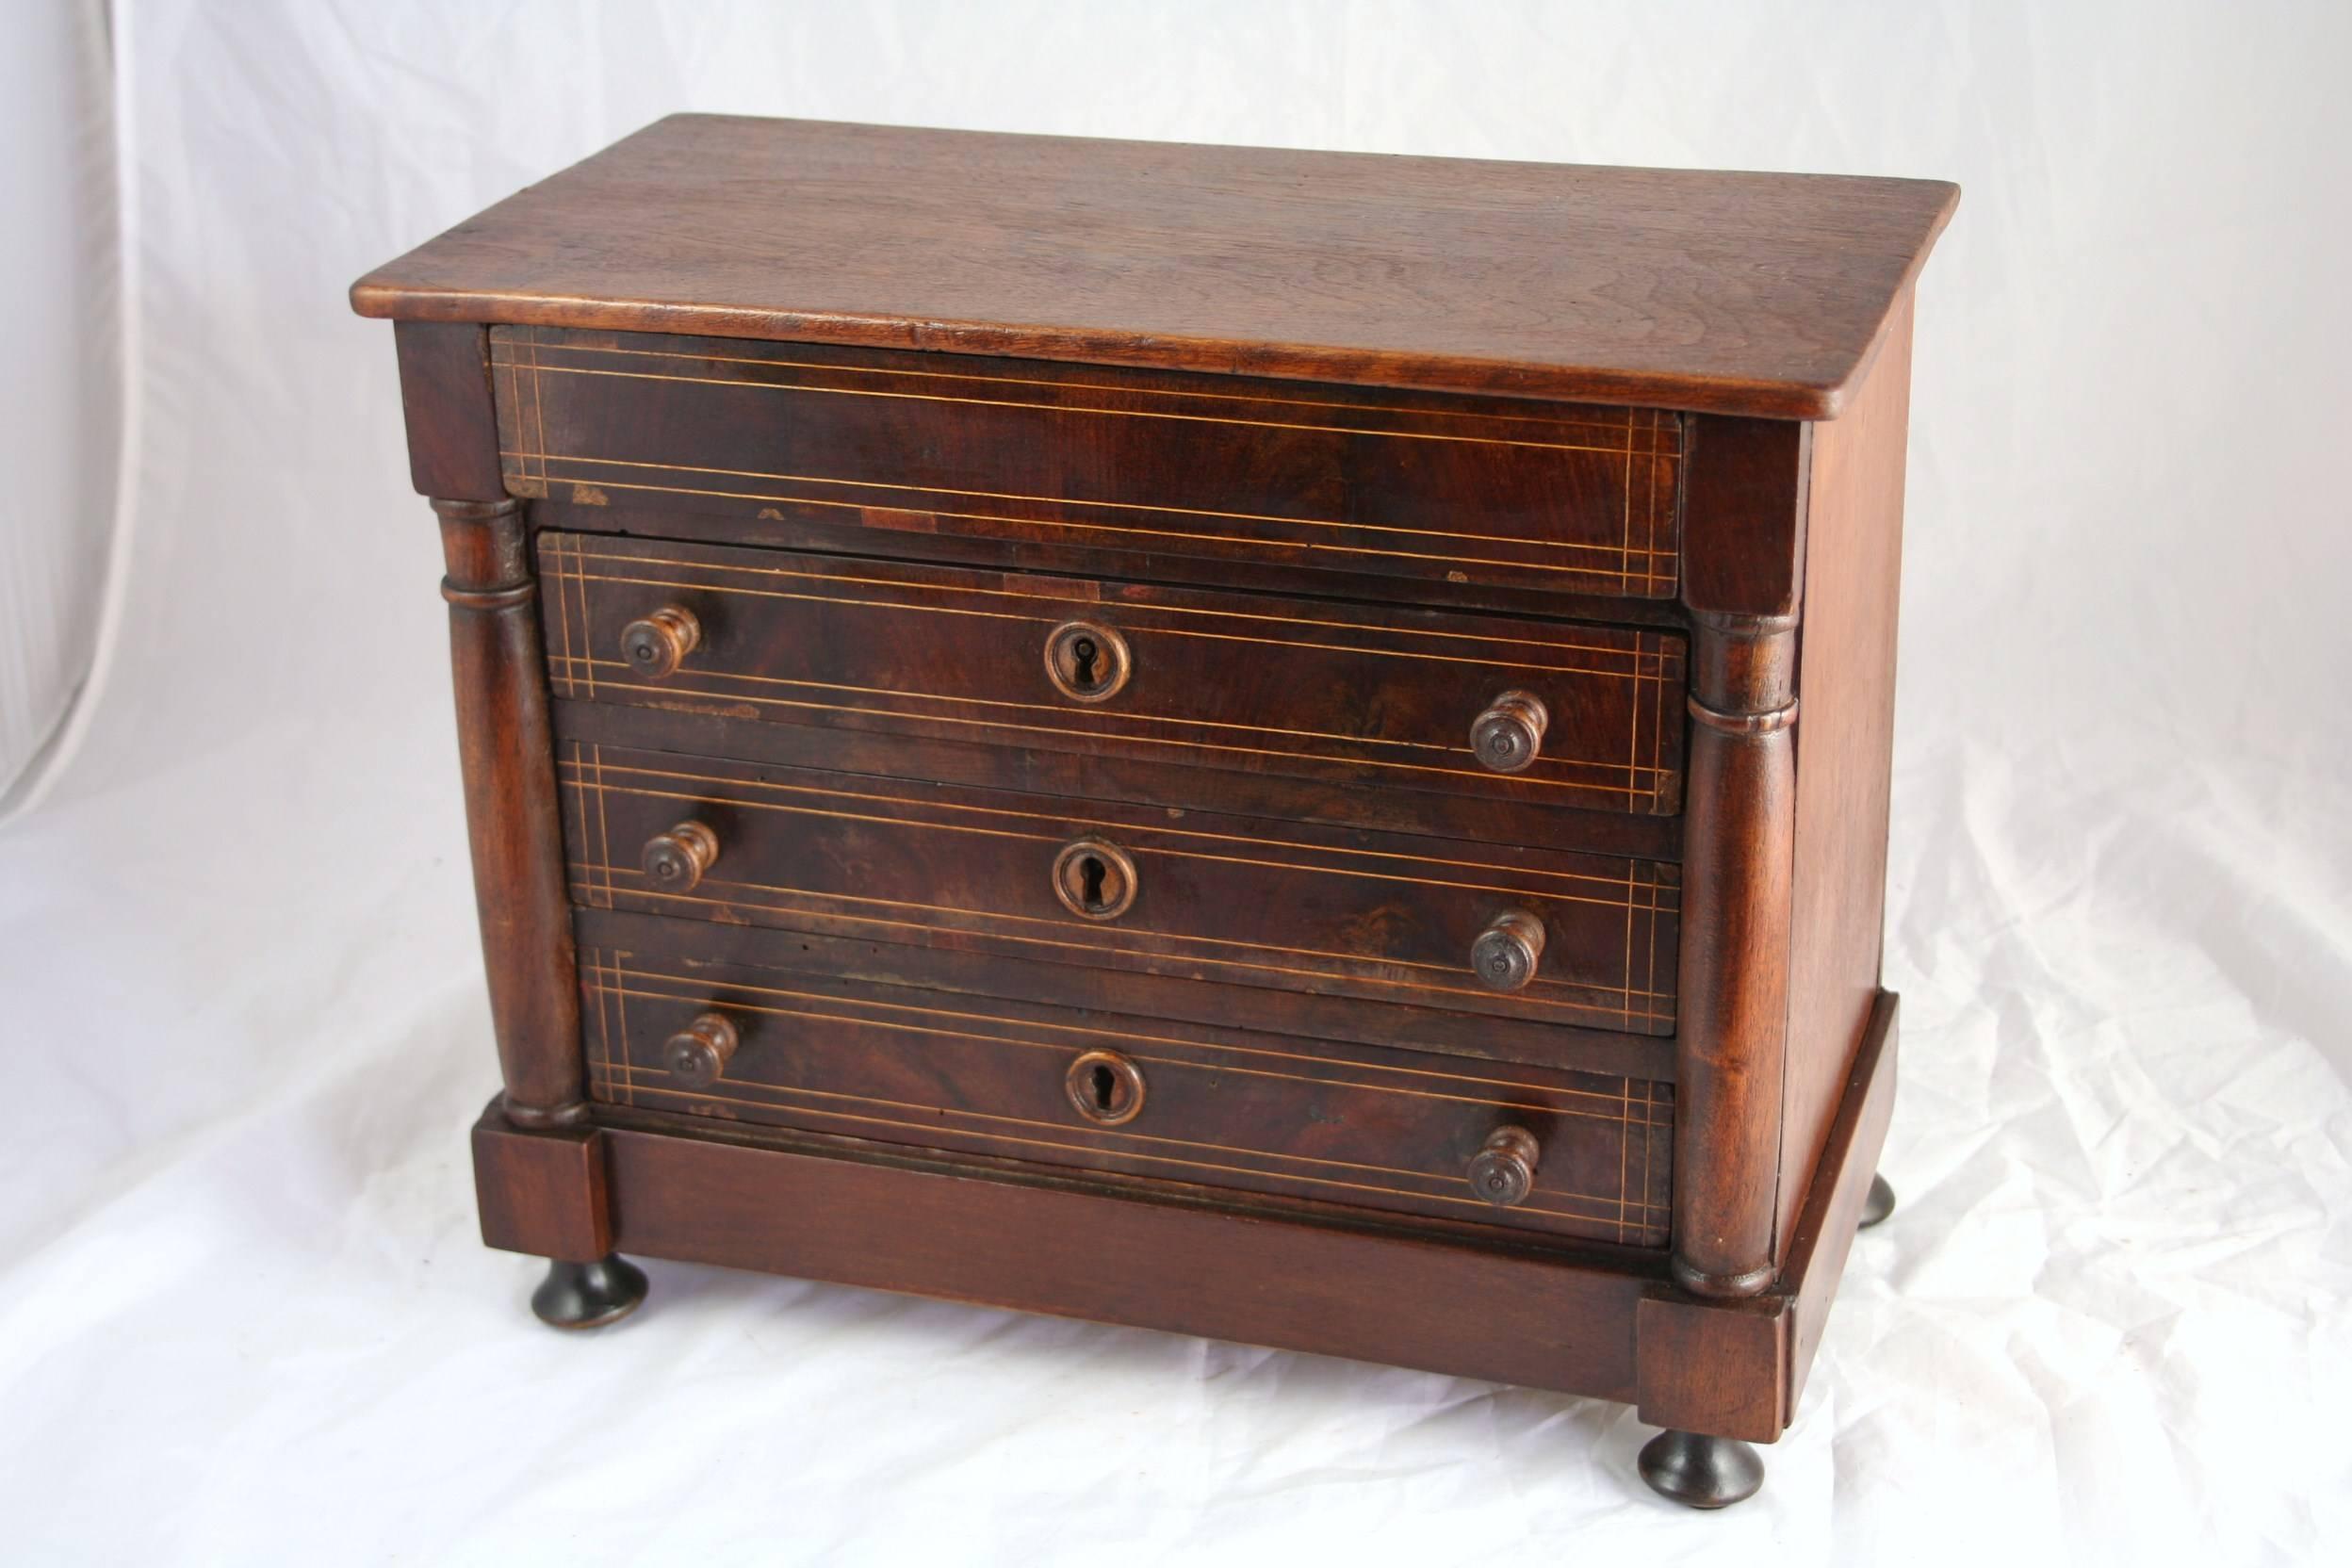 This fantastic 19th century Charles X style miniature chest features beautifully burled deeply toned walnut with lemon wood inlay. Accented with Empire columns, this piece has three drawers with pulls and original wooden key entries. A fourth top